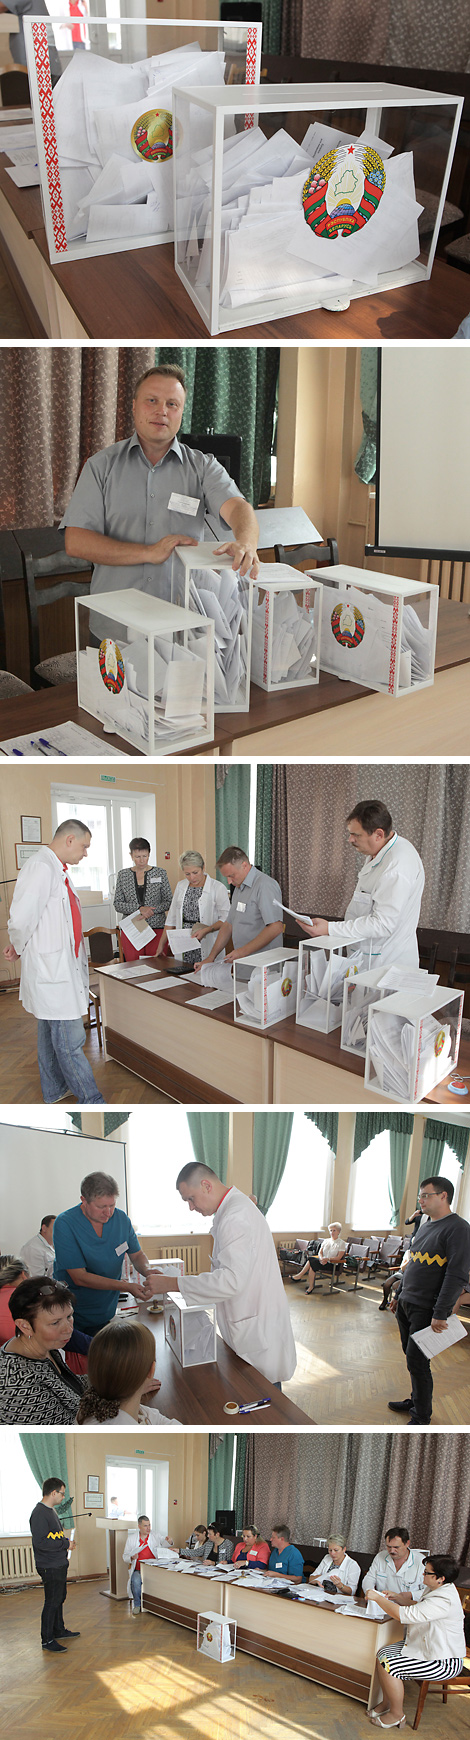 Ballot count at polling station of Mogilev Emergency Care Hospital 